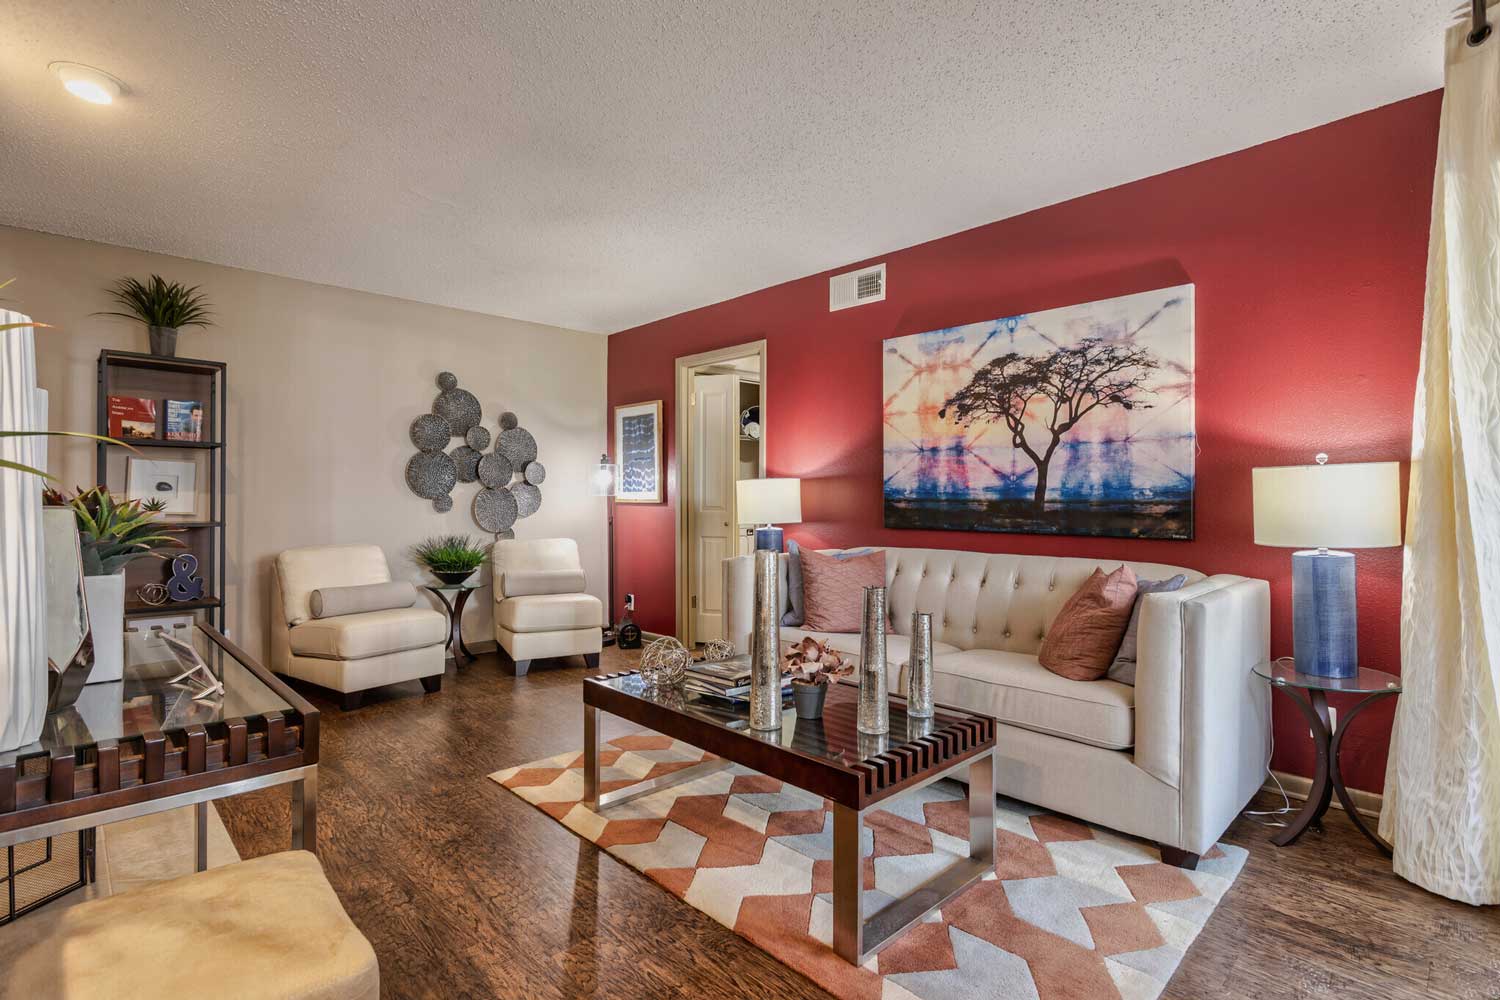 Designer Two-Tone Paint at Ridgeview Place Apartments in Irving, TX